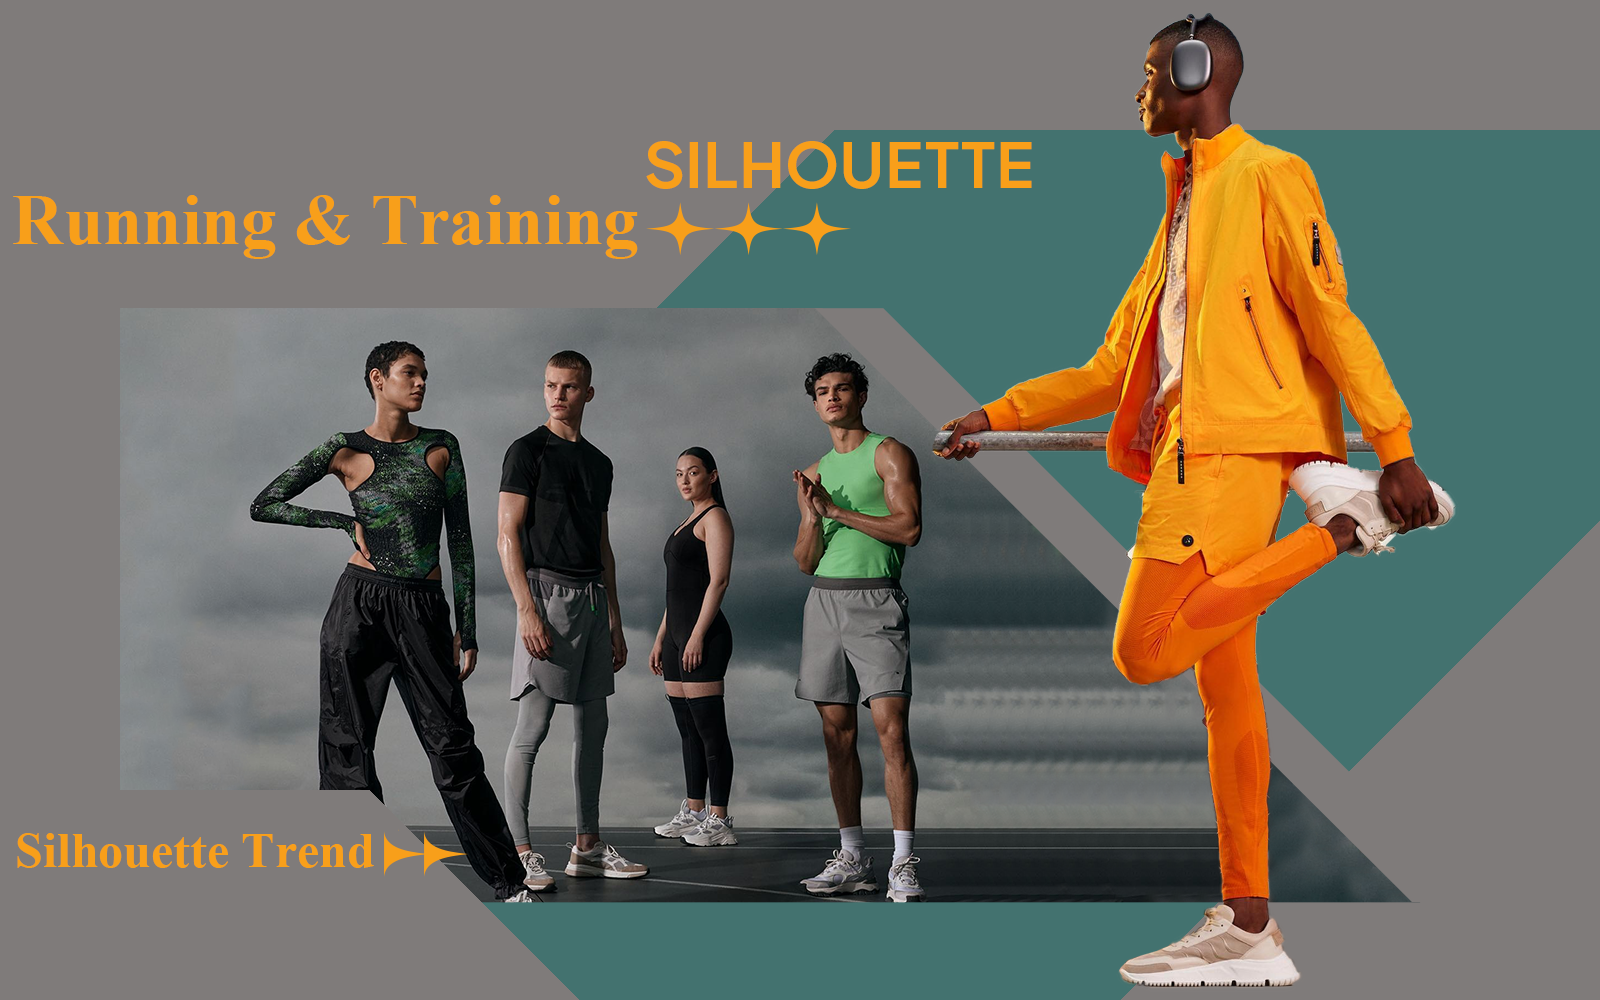 Advanced Training -- The Silhouette Trend for Sportswear